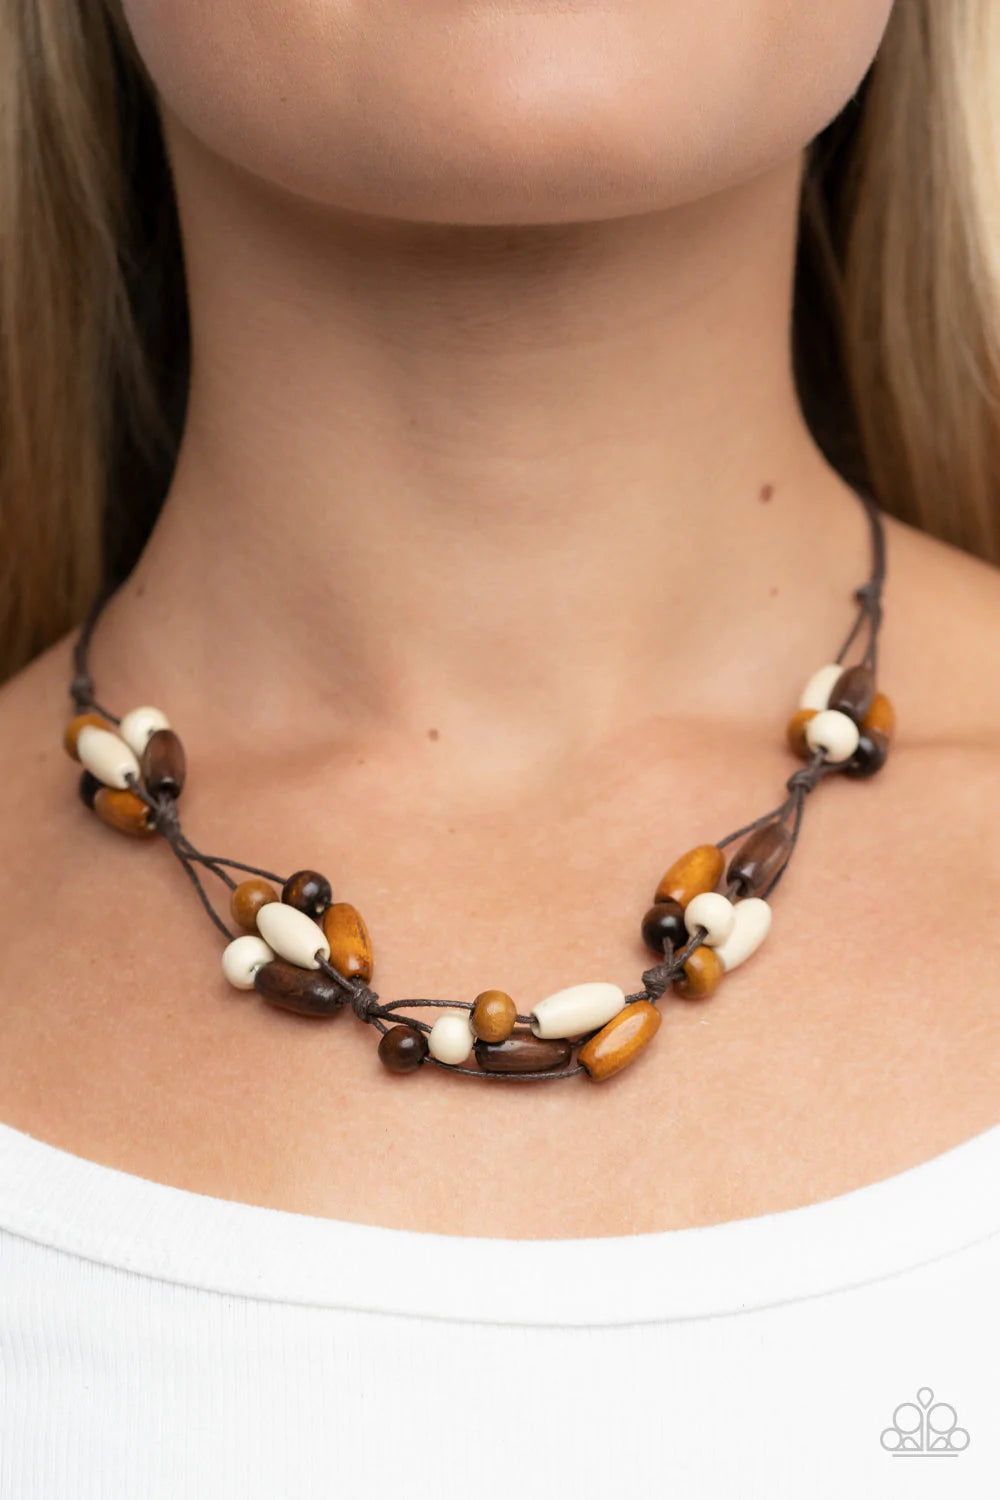 Outback Epic - Brown Necklace - Paparazzi Accessories - Mismatched clusters of brown, white, and dark brown wooden beads are knotted in place along shiny brown cords below the collar for an earthy flair. Features a button loop closure. Sold as one individual necklace.